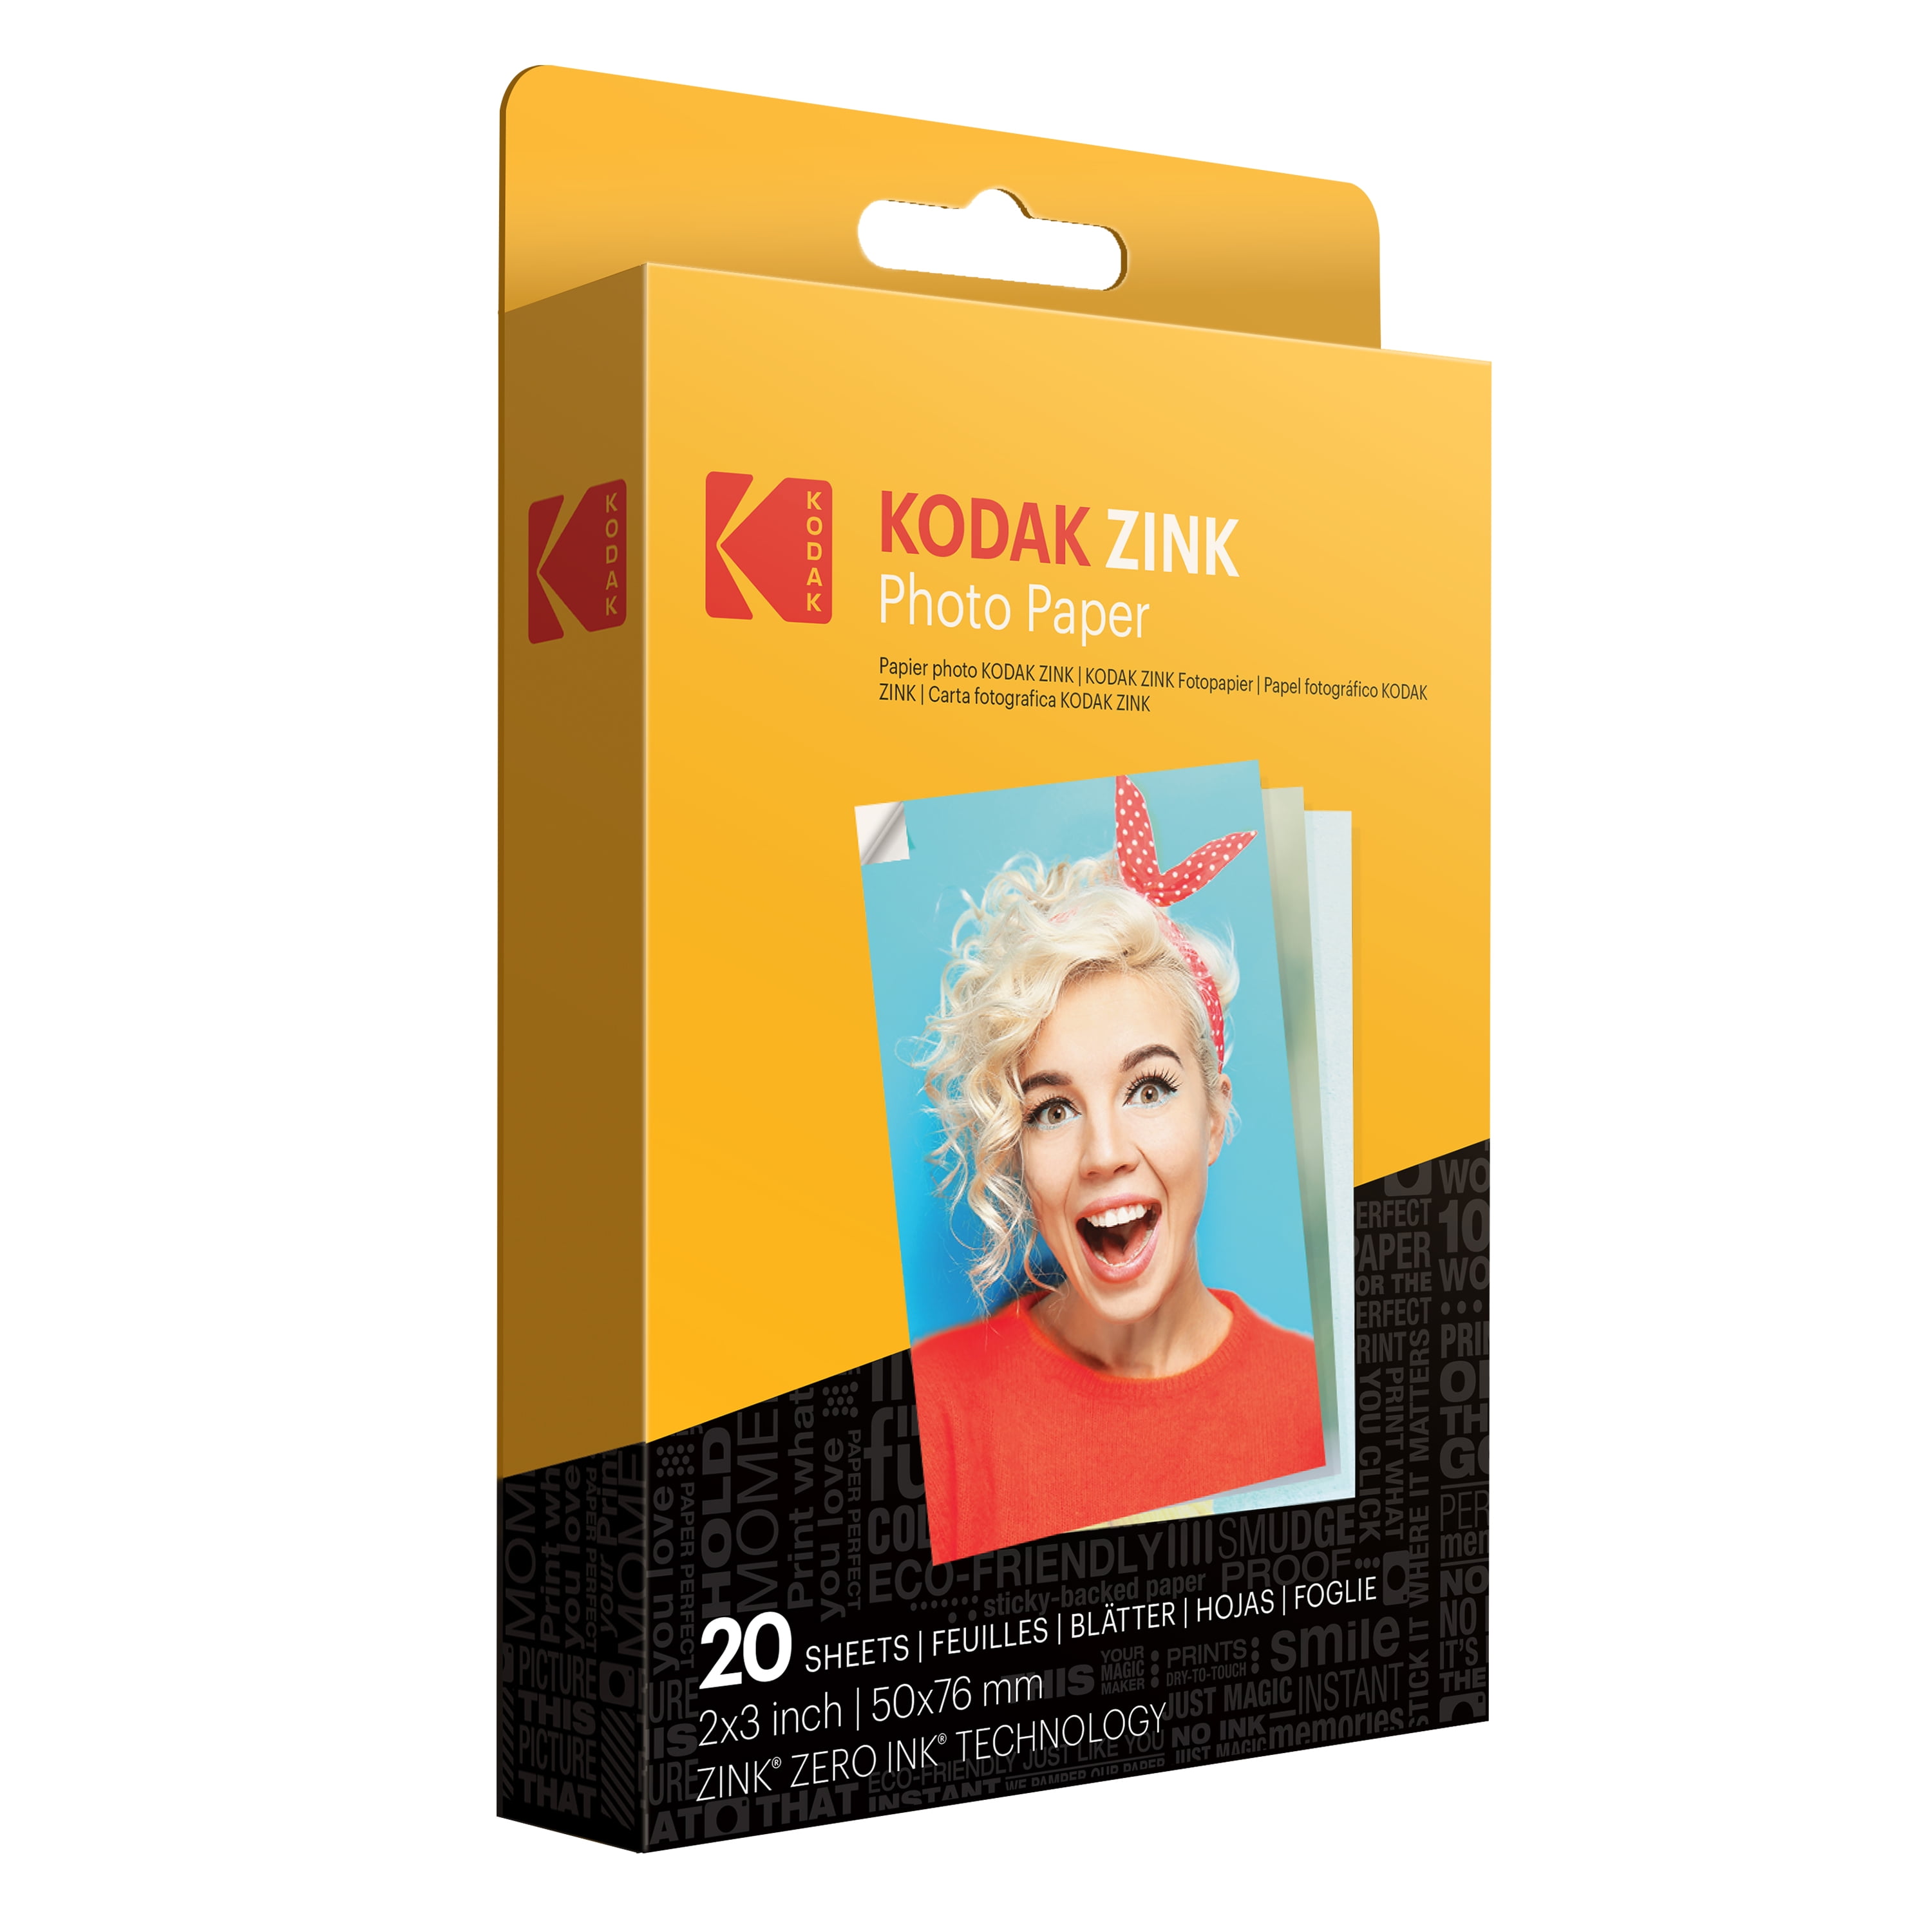 KODAK Step Slim Instant Mobile Color Photo Printer – Wirelessly Print 2x3”  Photos on Zink Paper with iOS & Android Devices, White